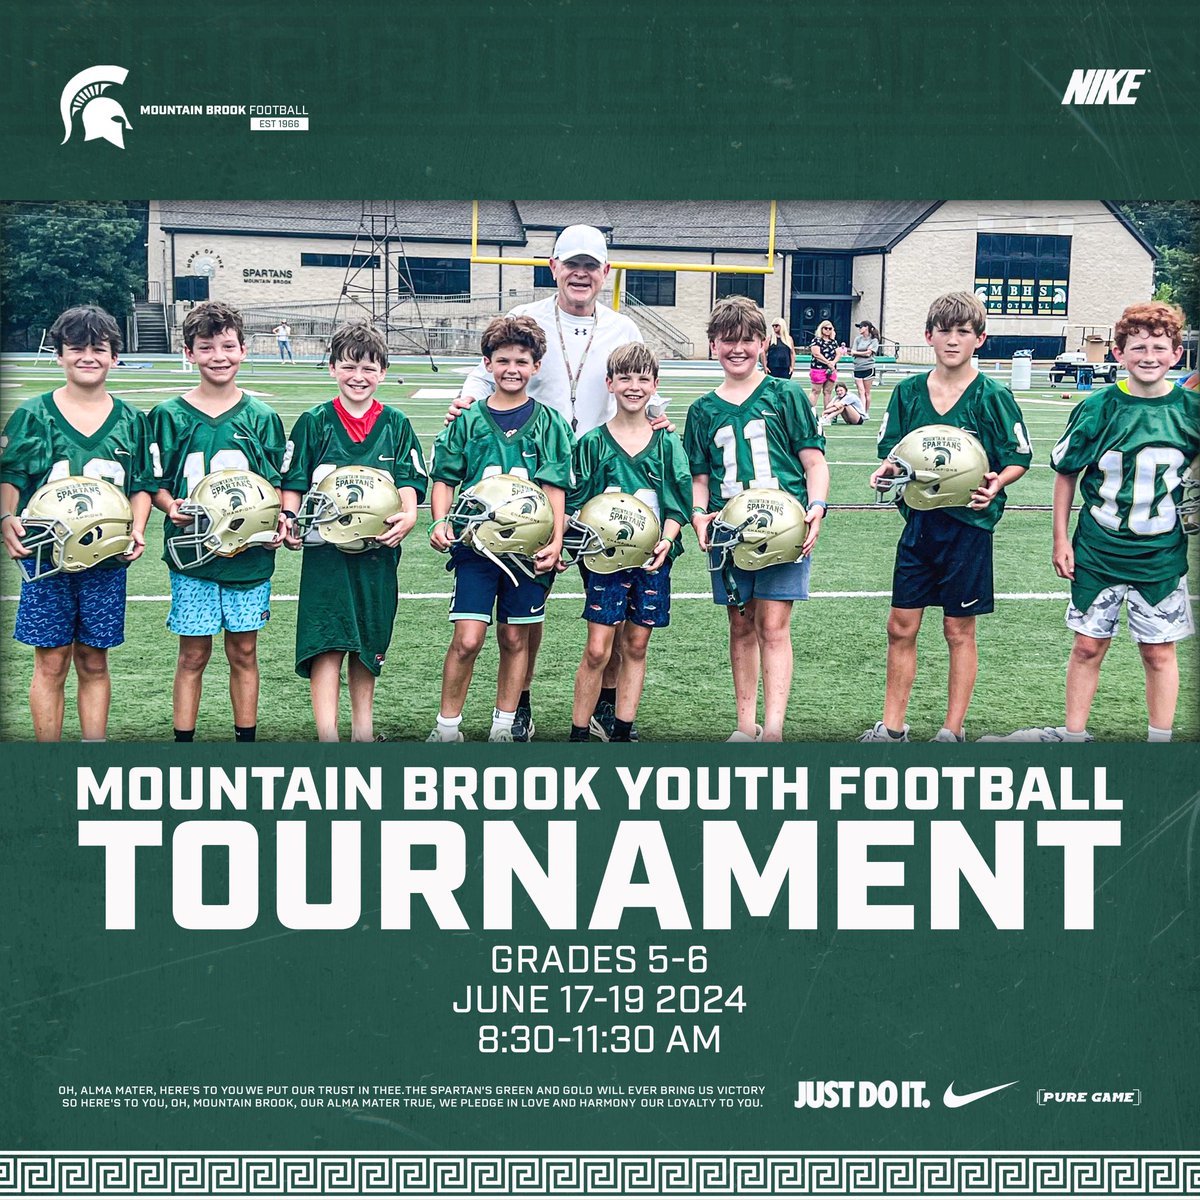 107 campers have signed up in the first 24 hours of registration. Please sign up while spots are available. Link to registration webpage: mtnbrook.k12.al.us/Page/22665